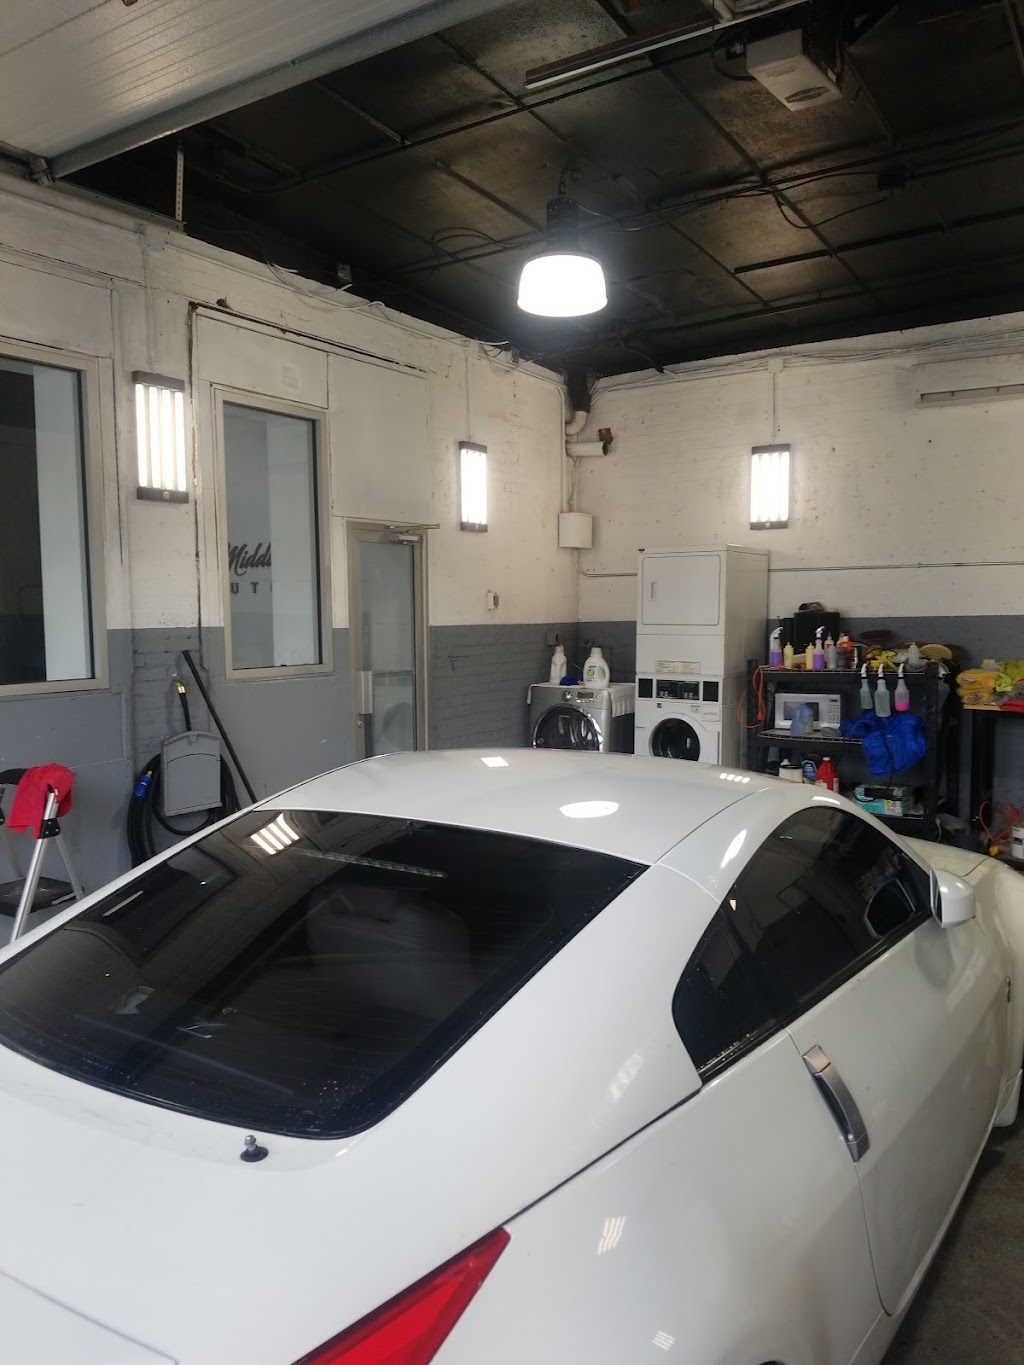 Middle Village Auto Spa | 61-02 69th St, Queens, NY 11379 | Phone: (718) 326-2969